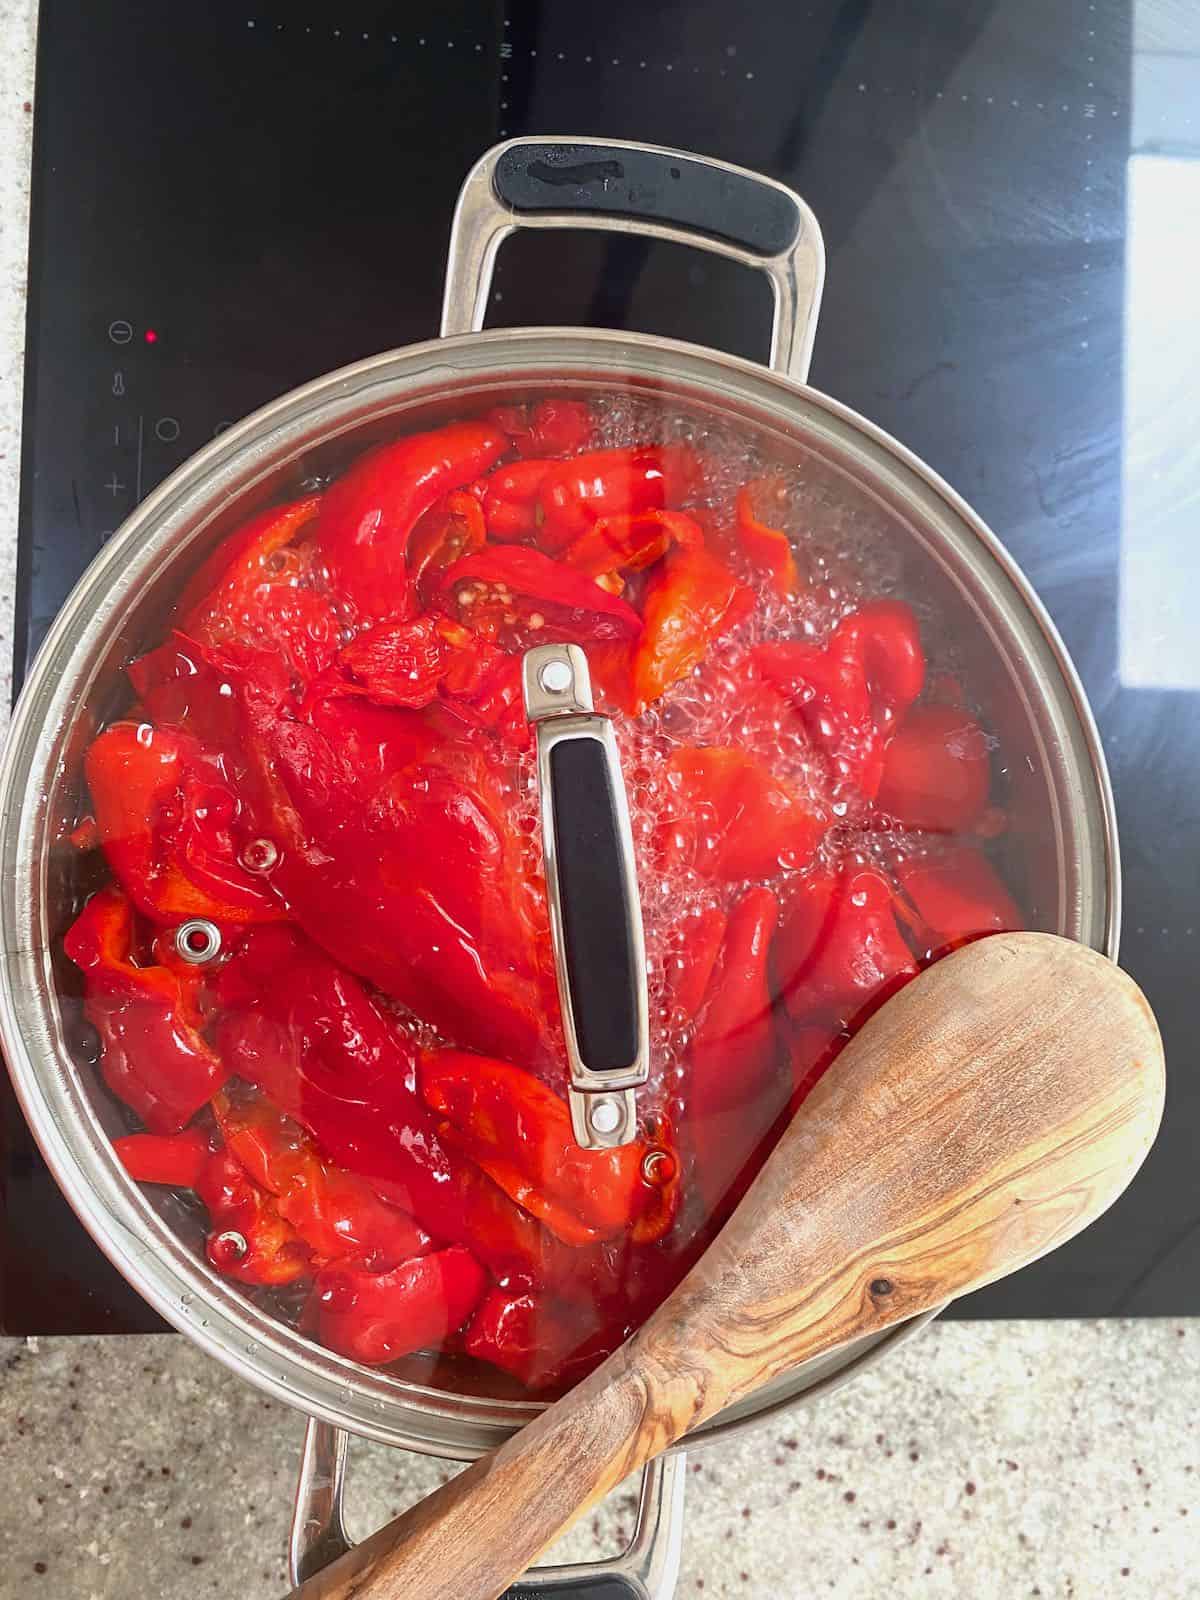 Cooking red peppers in a pot